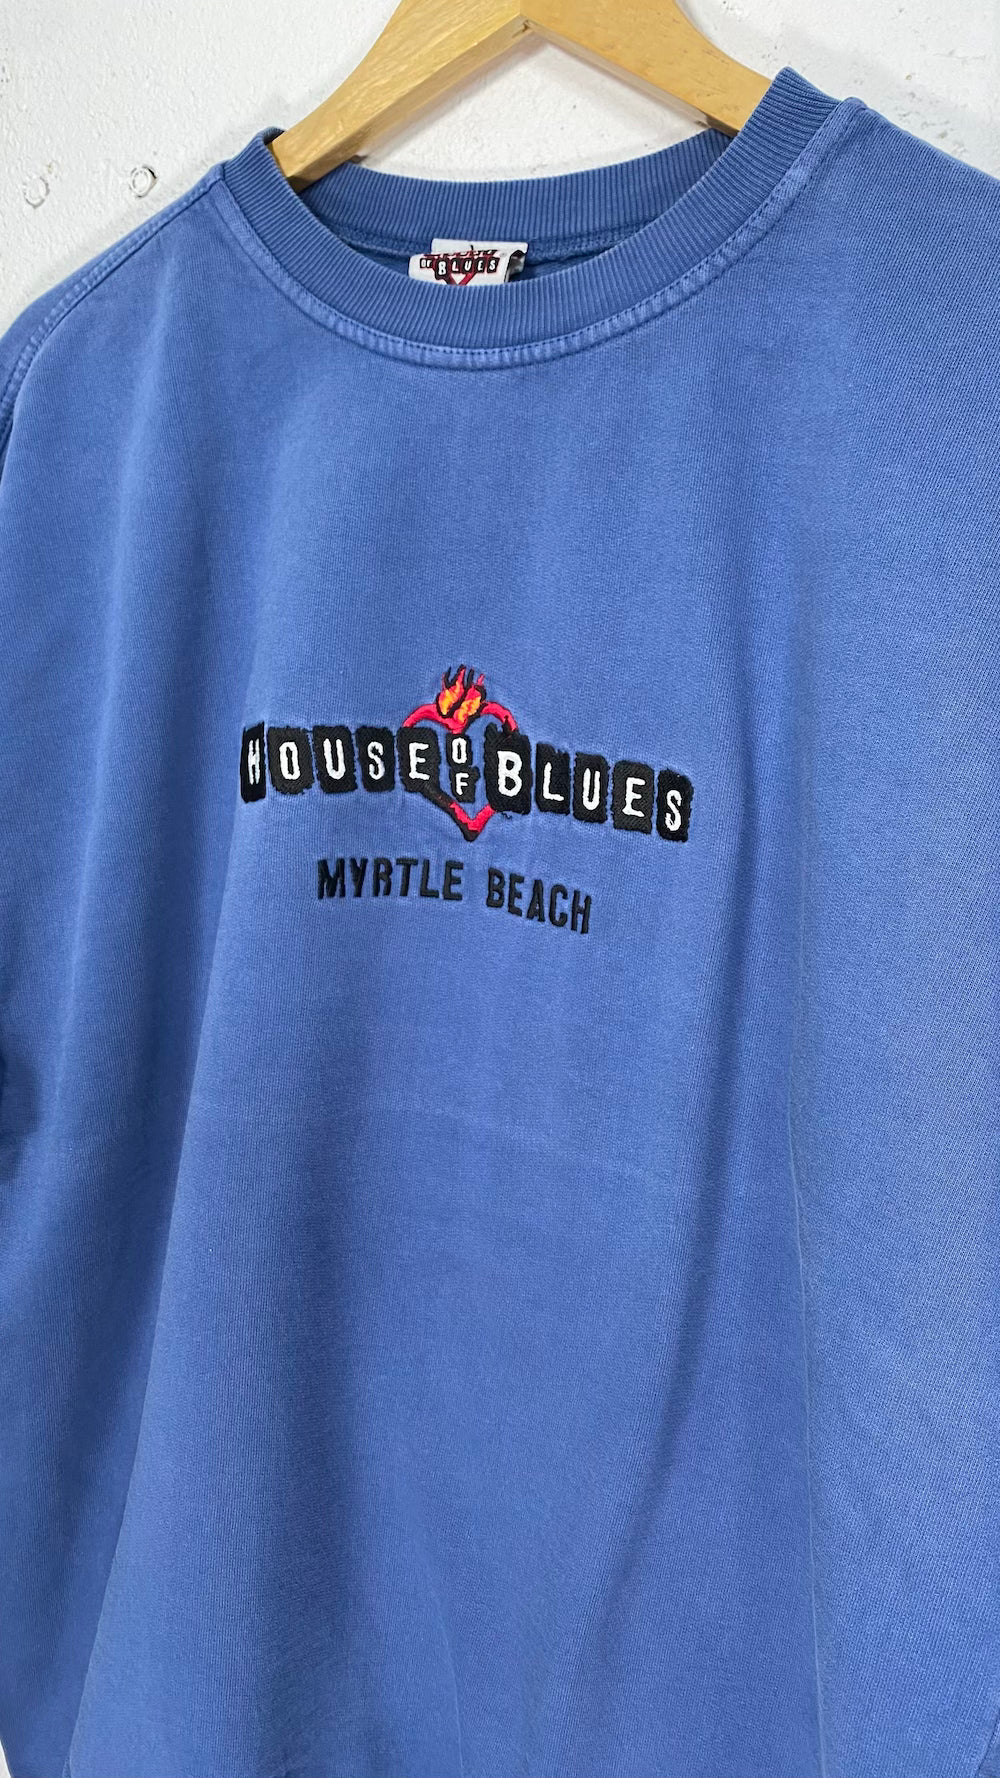 House of Blues Myrtle Beach 1990's Vintage Sweater